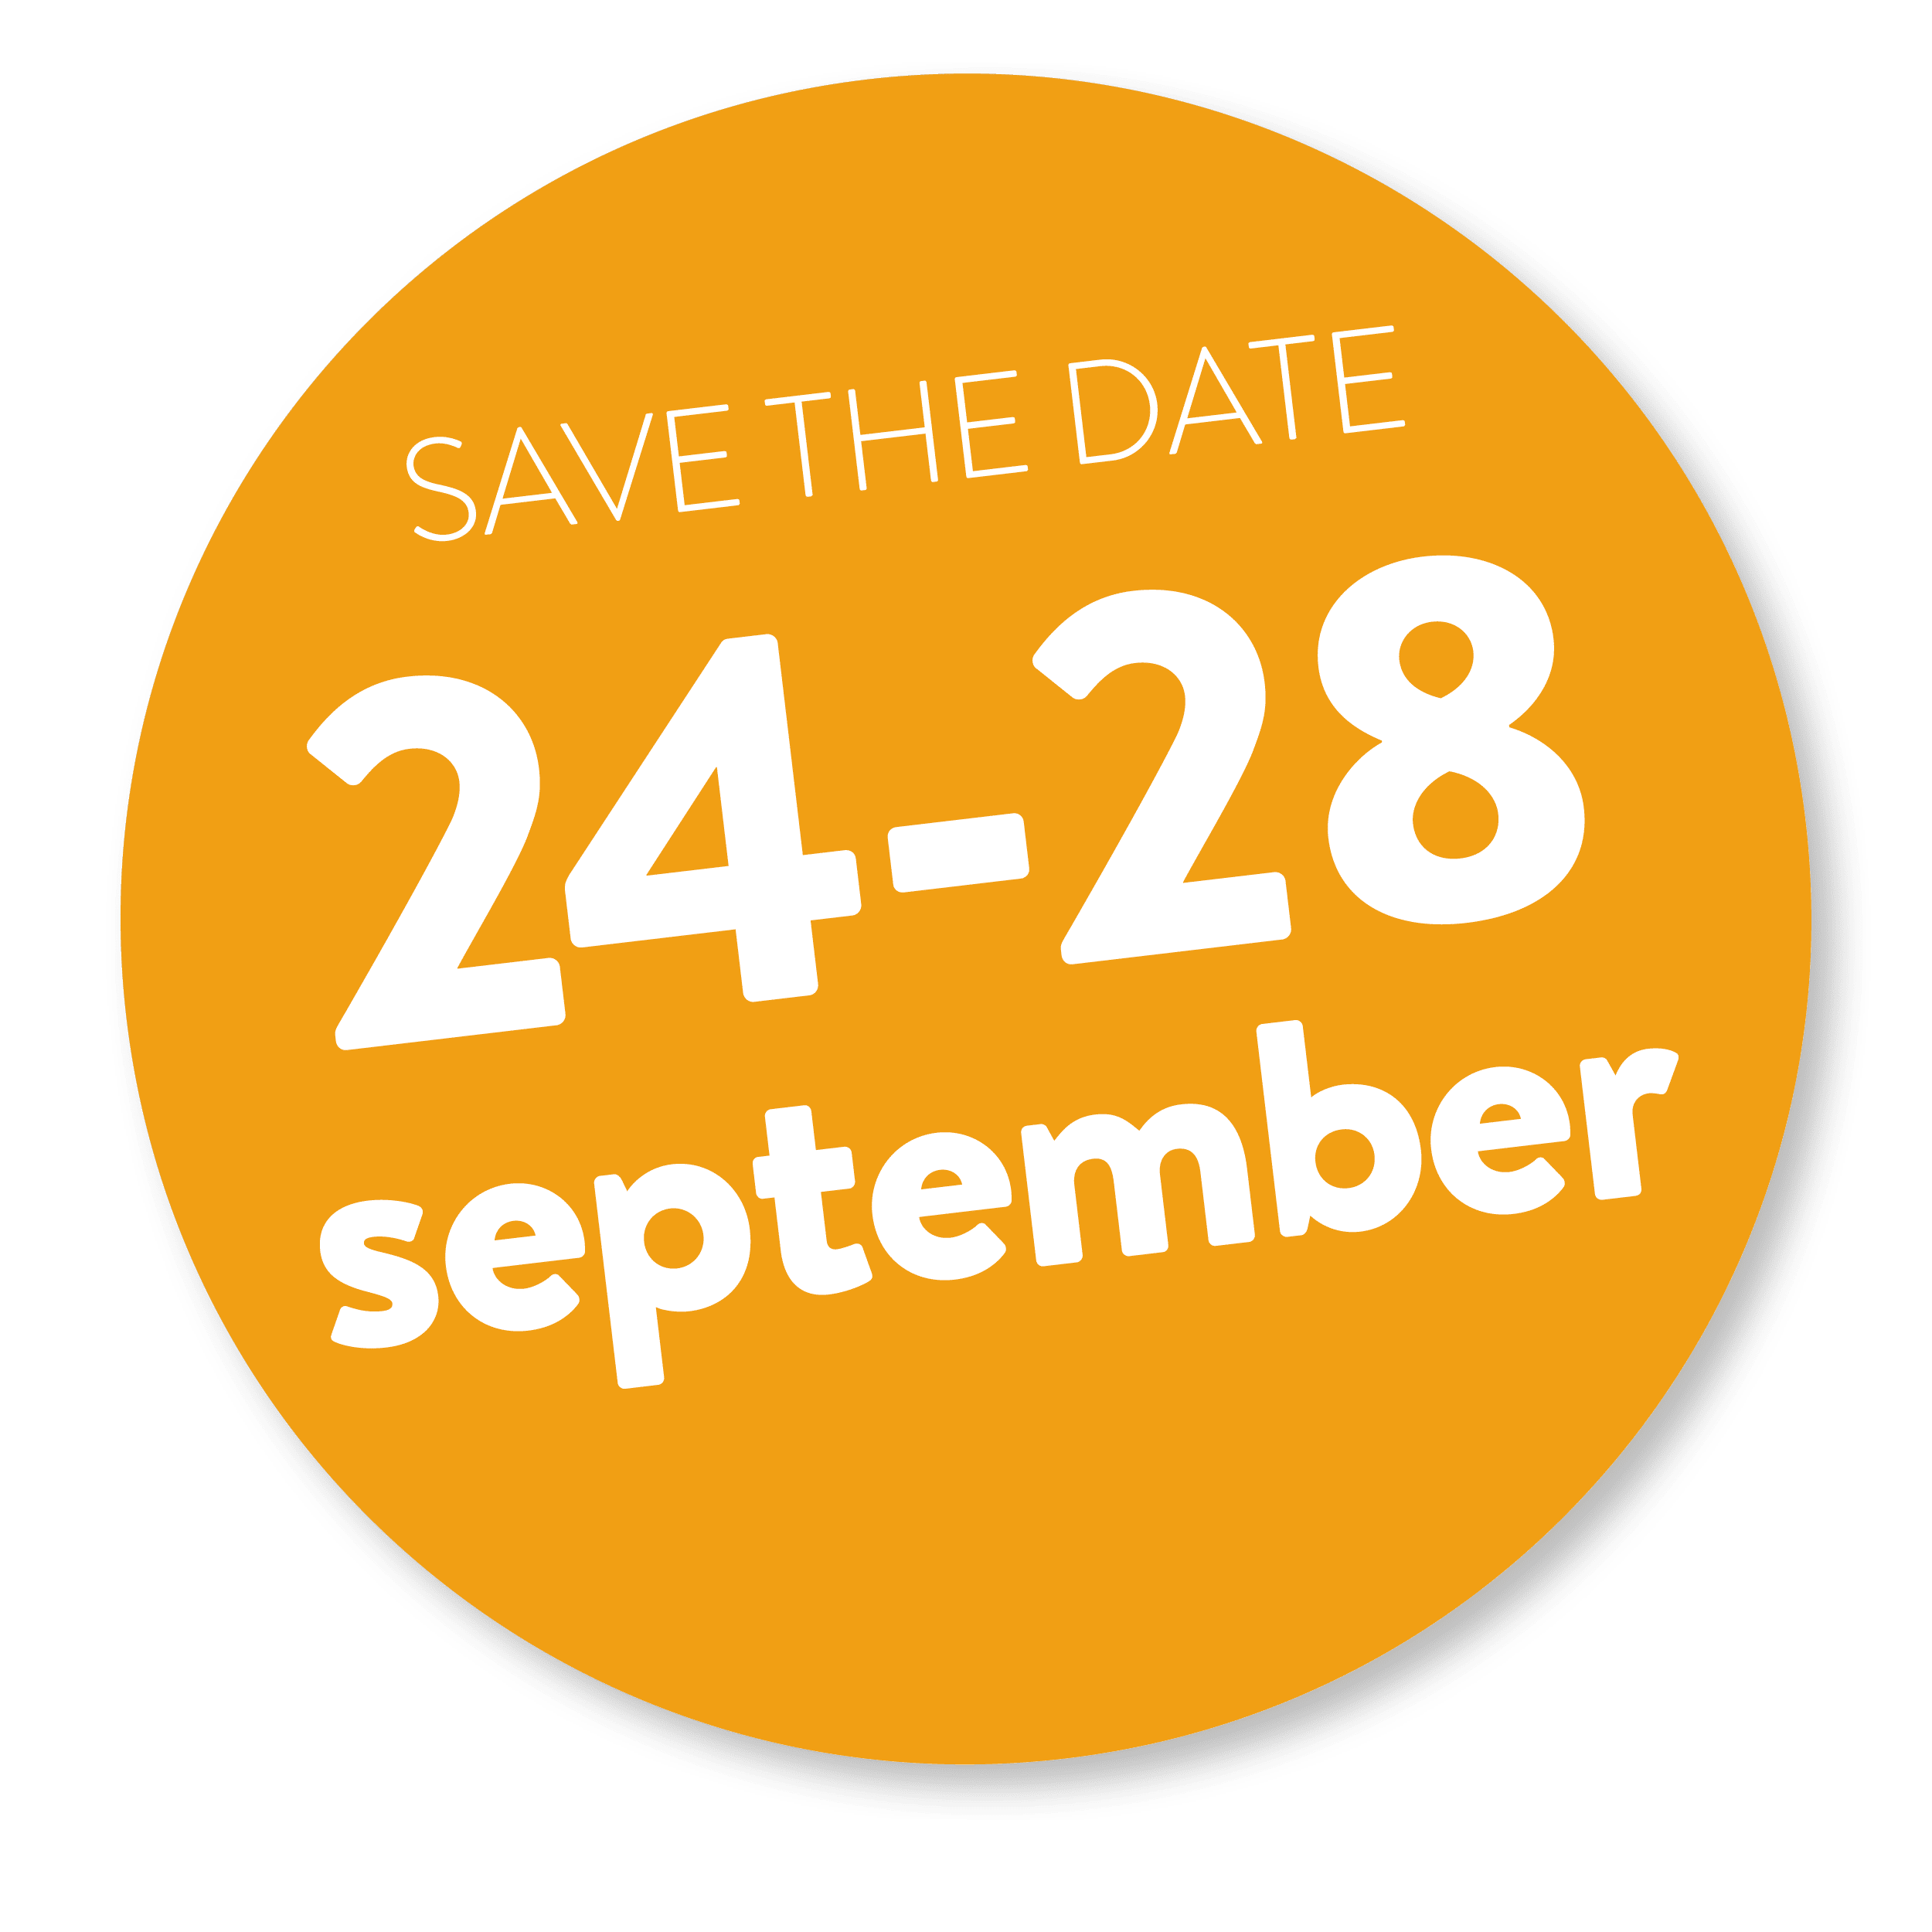 save the date 24-28september